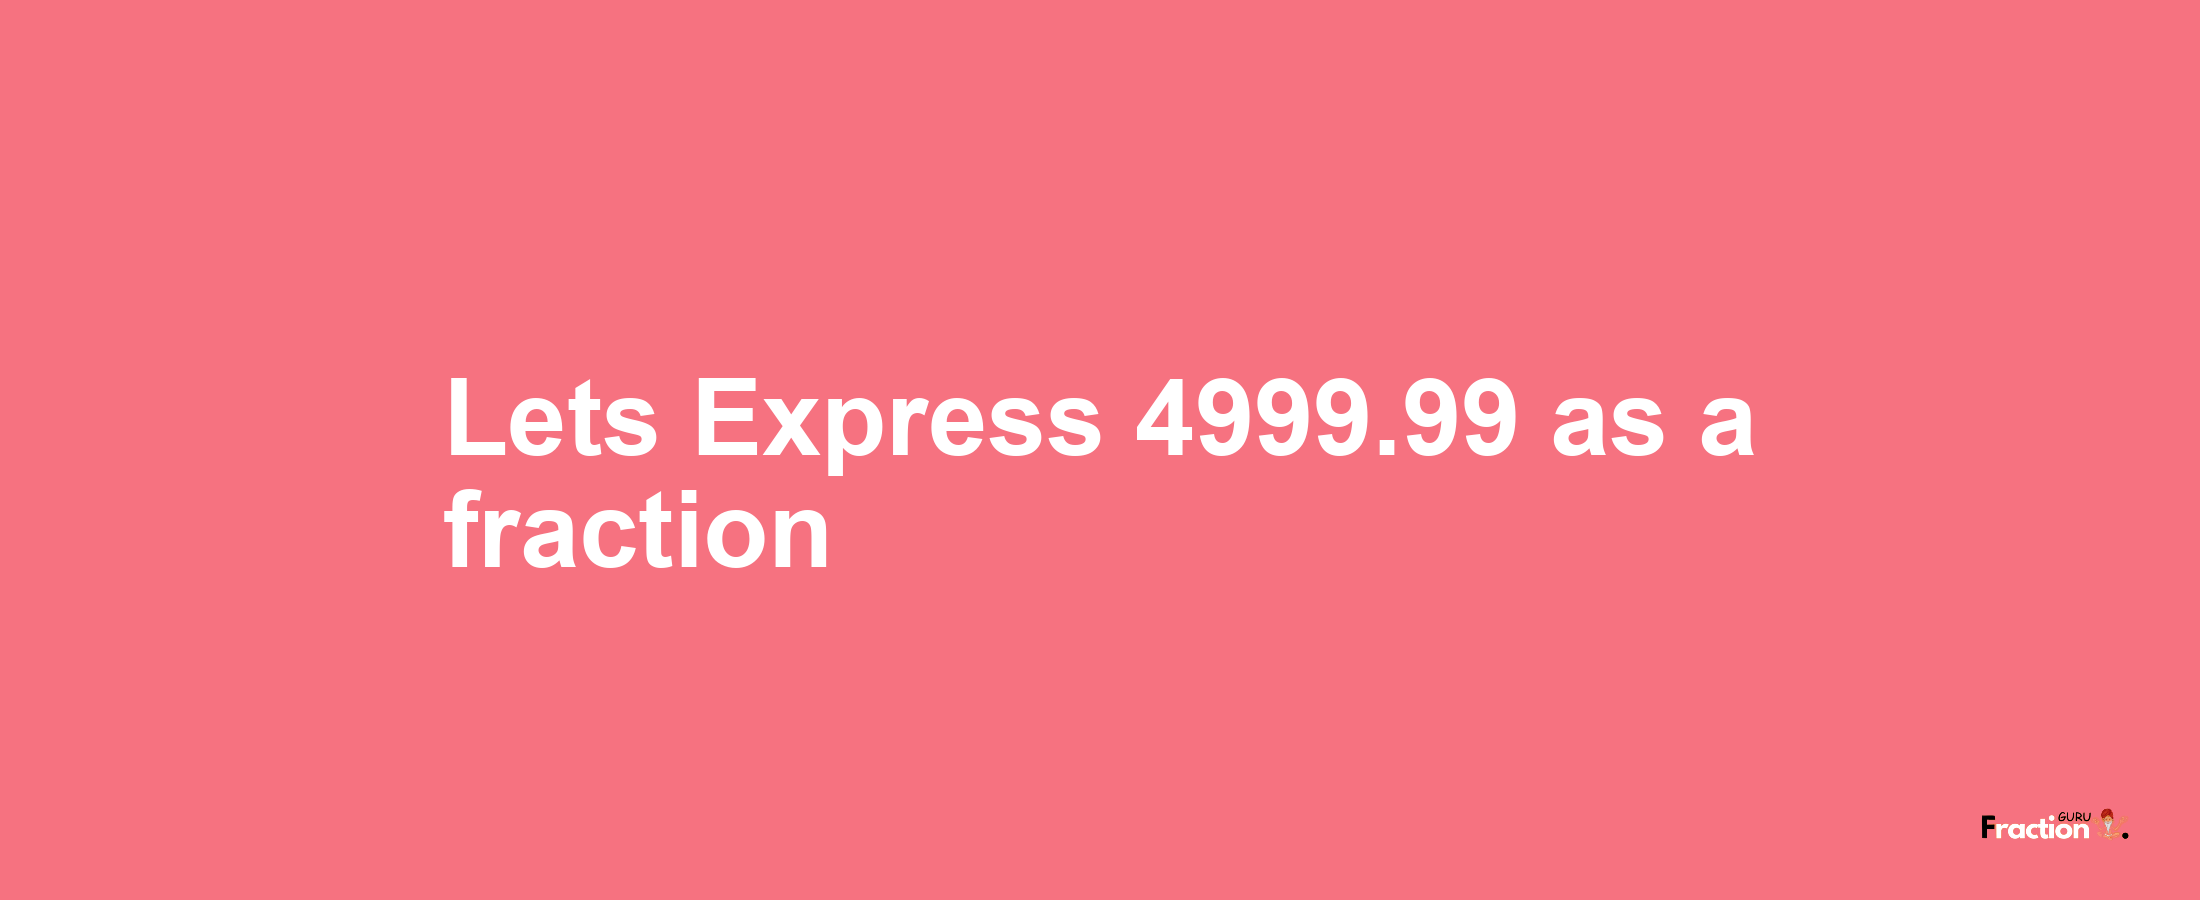 Lets Express 4999.99 as afraction